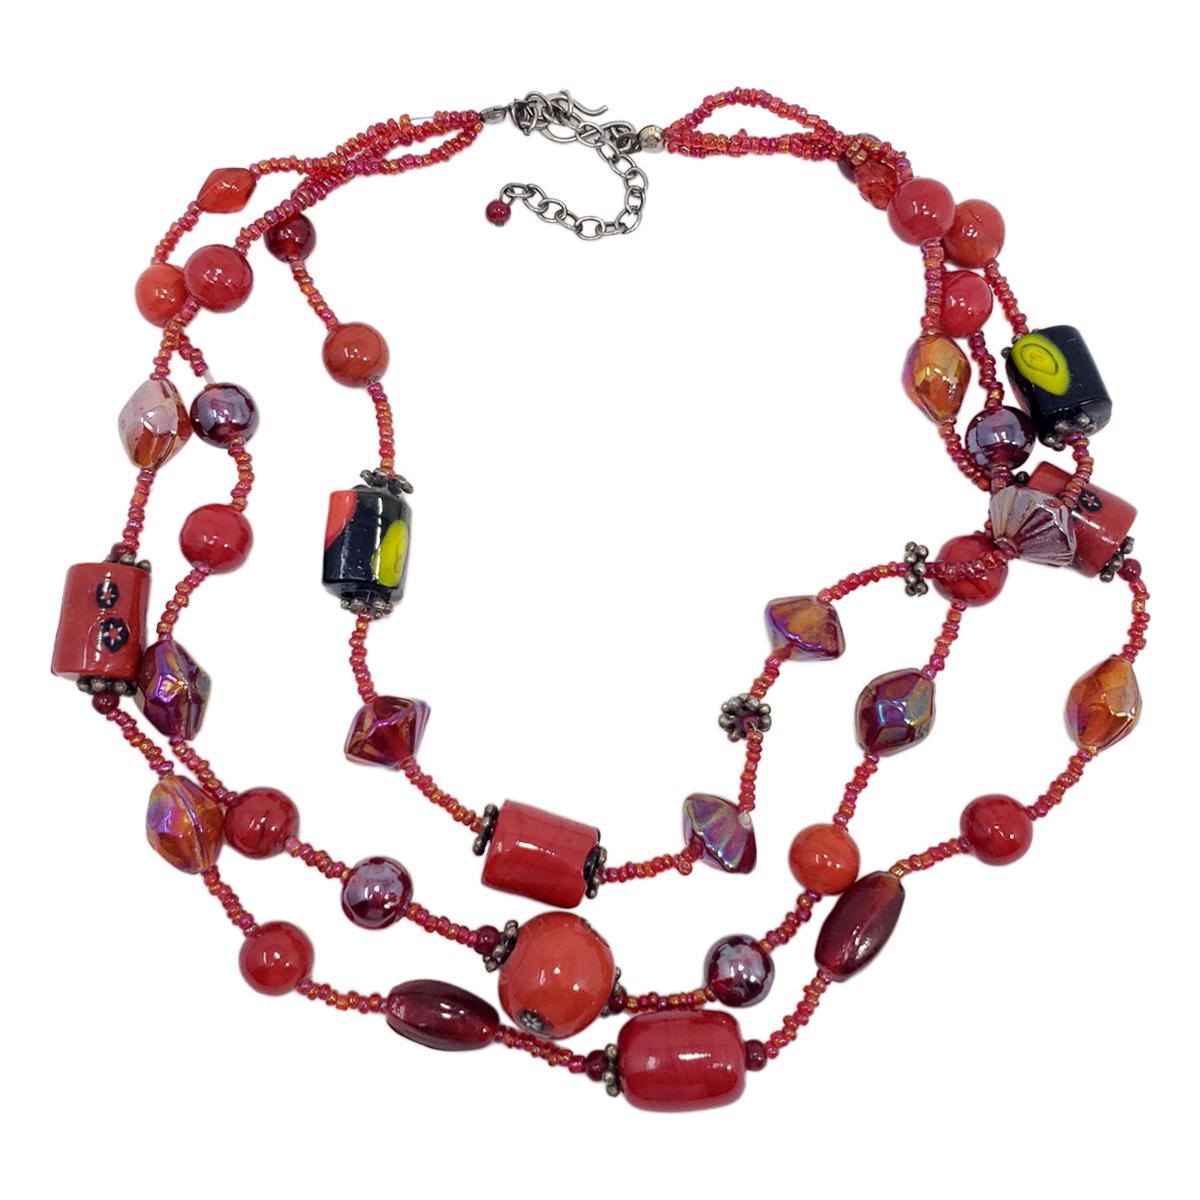 Vintage Red Art Glass Bead Multi Strand Necklace, Red, Black, Iridescent Accents For Sale